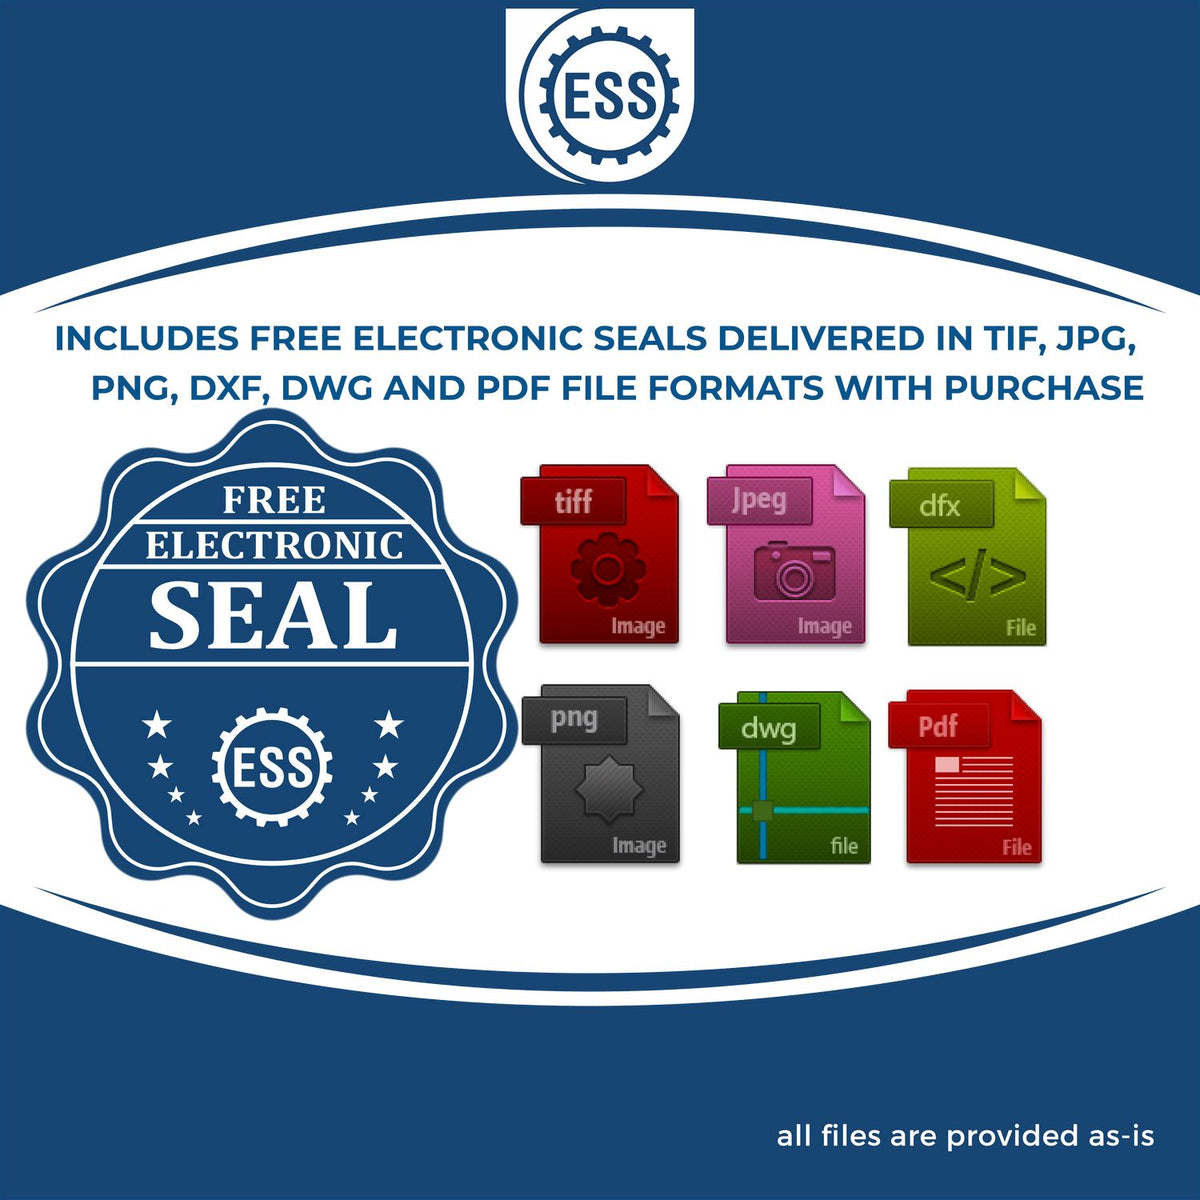 An infographic for the free electronic seal for the Handheld Arizona Land Surveyor Seal illustrating the different file type icons such as DXF, DWG, TIF, JPG and PNG.